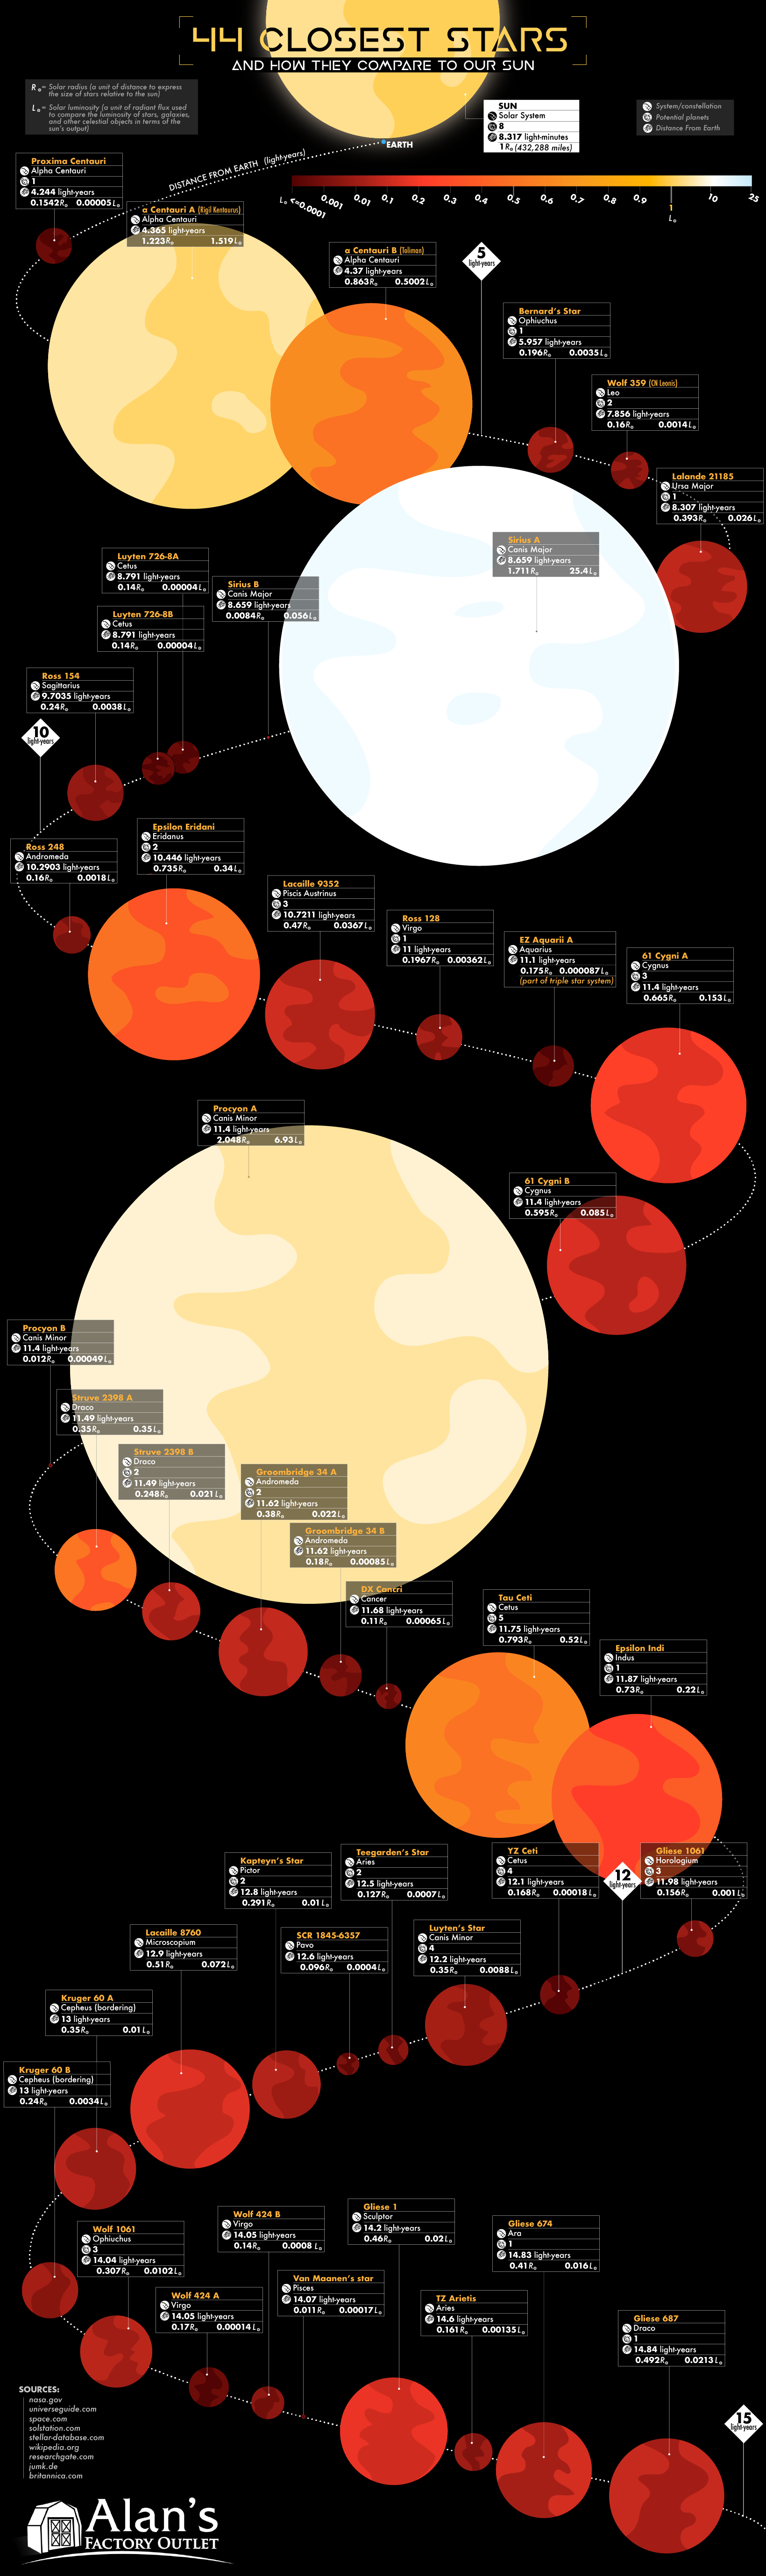 Did You Know About These 44 Stars Closest To Our Earth? - Infographic